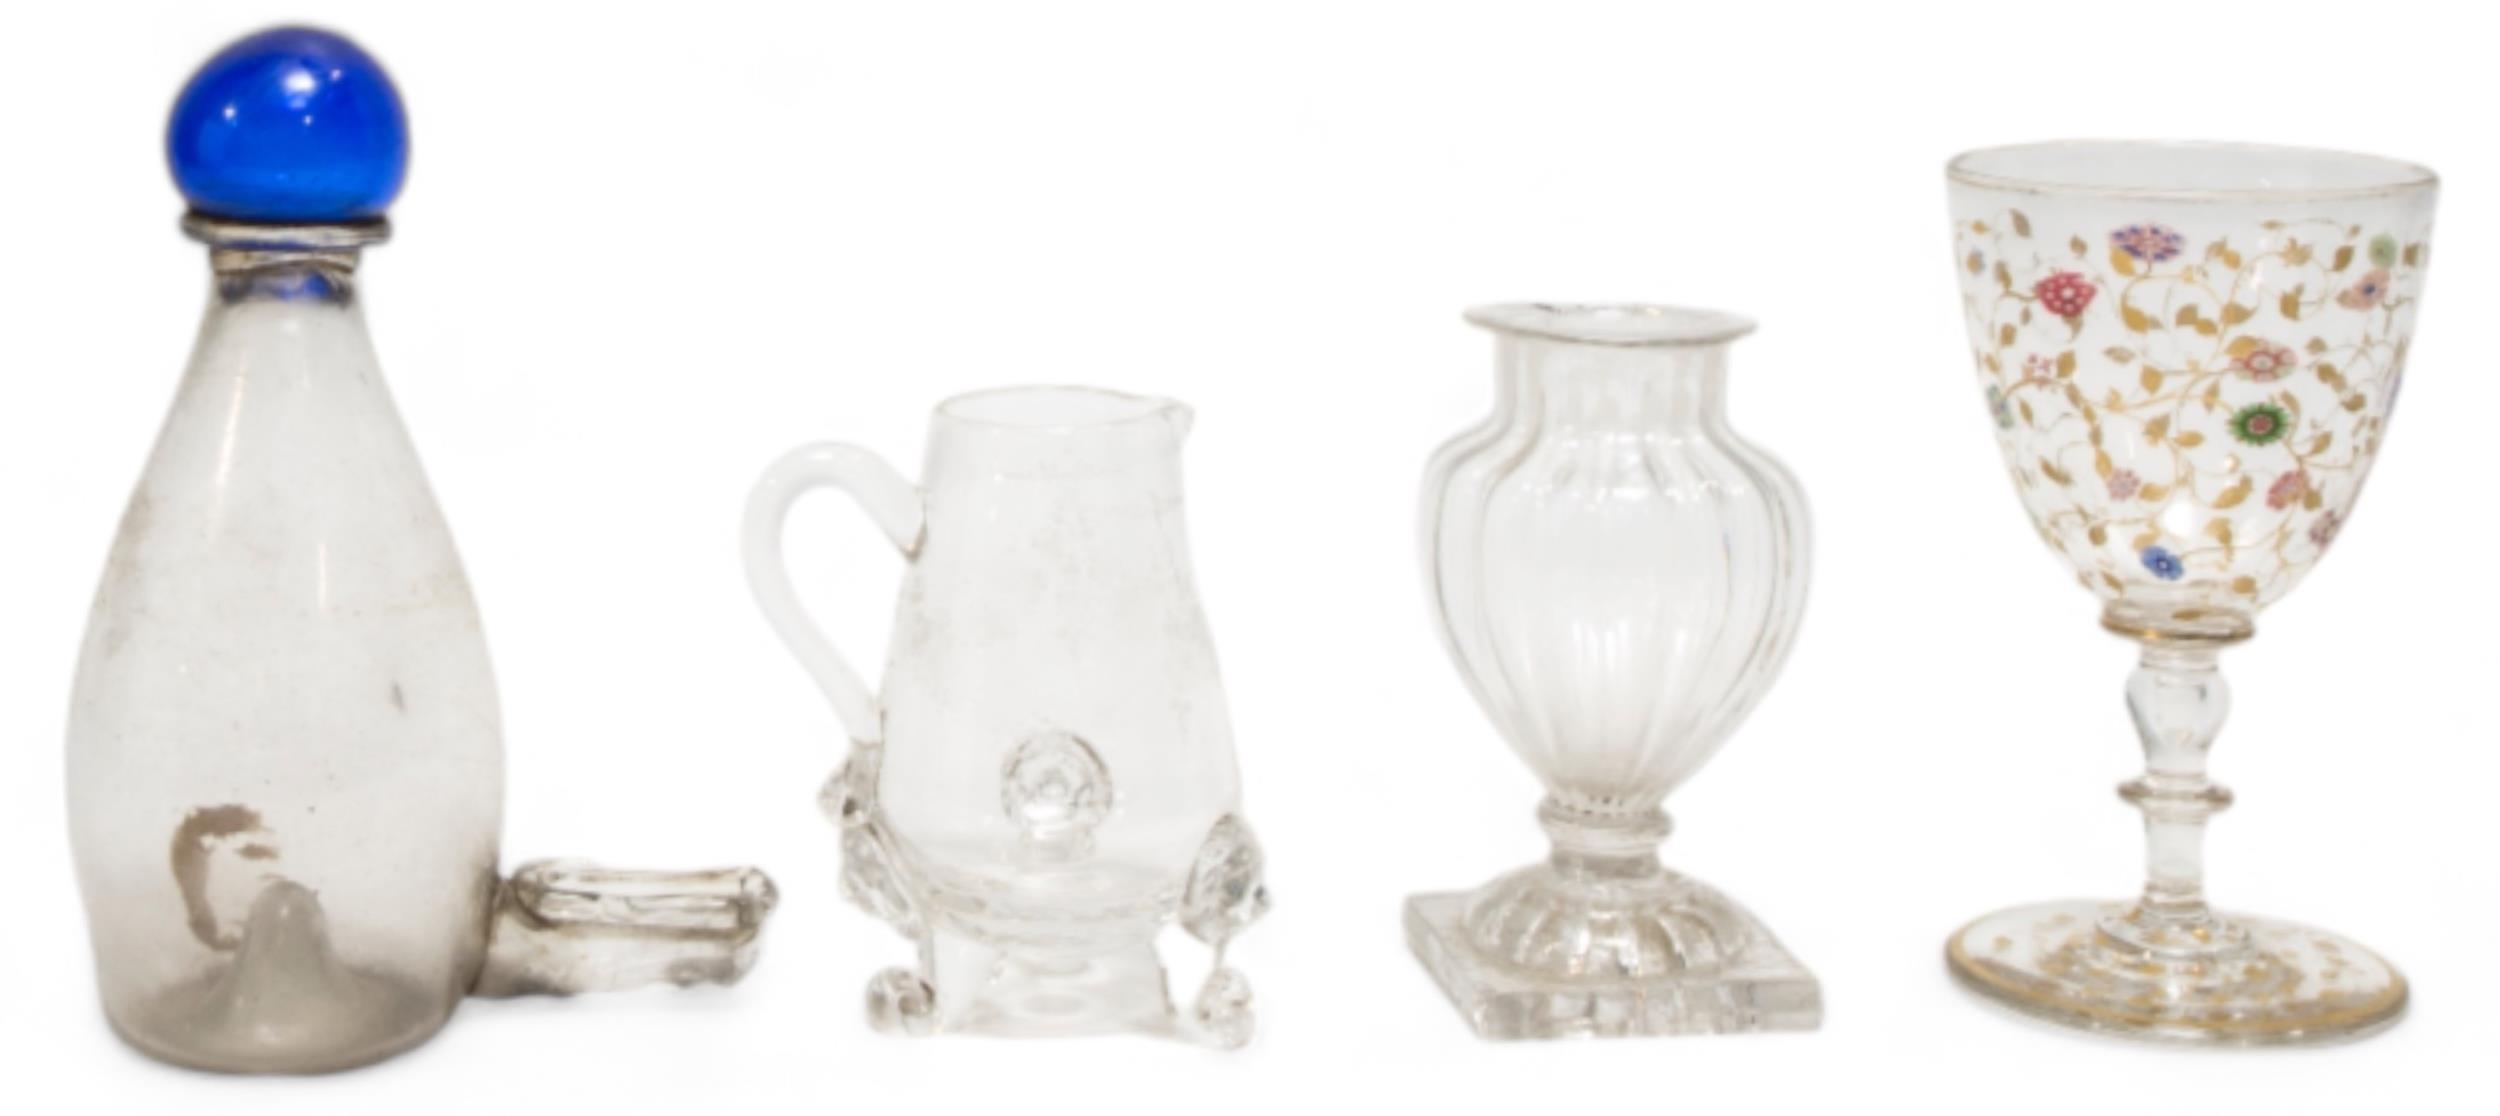 A MIXED GROUP OF GLASS WARE, PREDOMINANTLY 18TH/19TH CENTURY, the lot includes a conch form vase, - Image 6 of 6